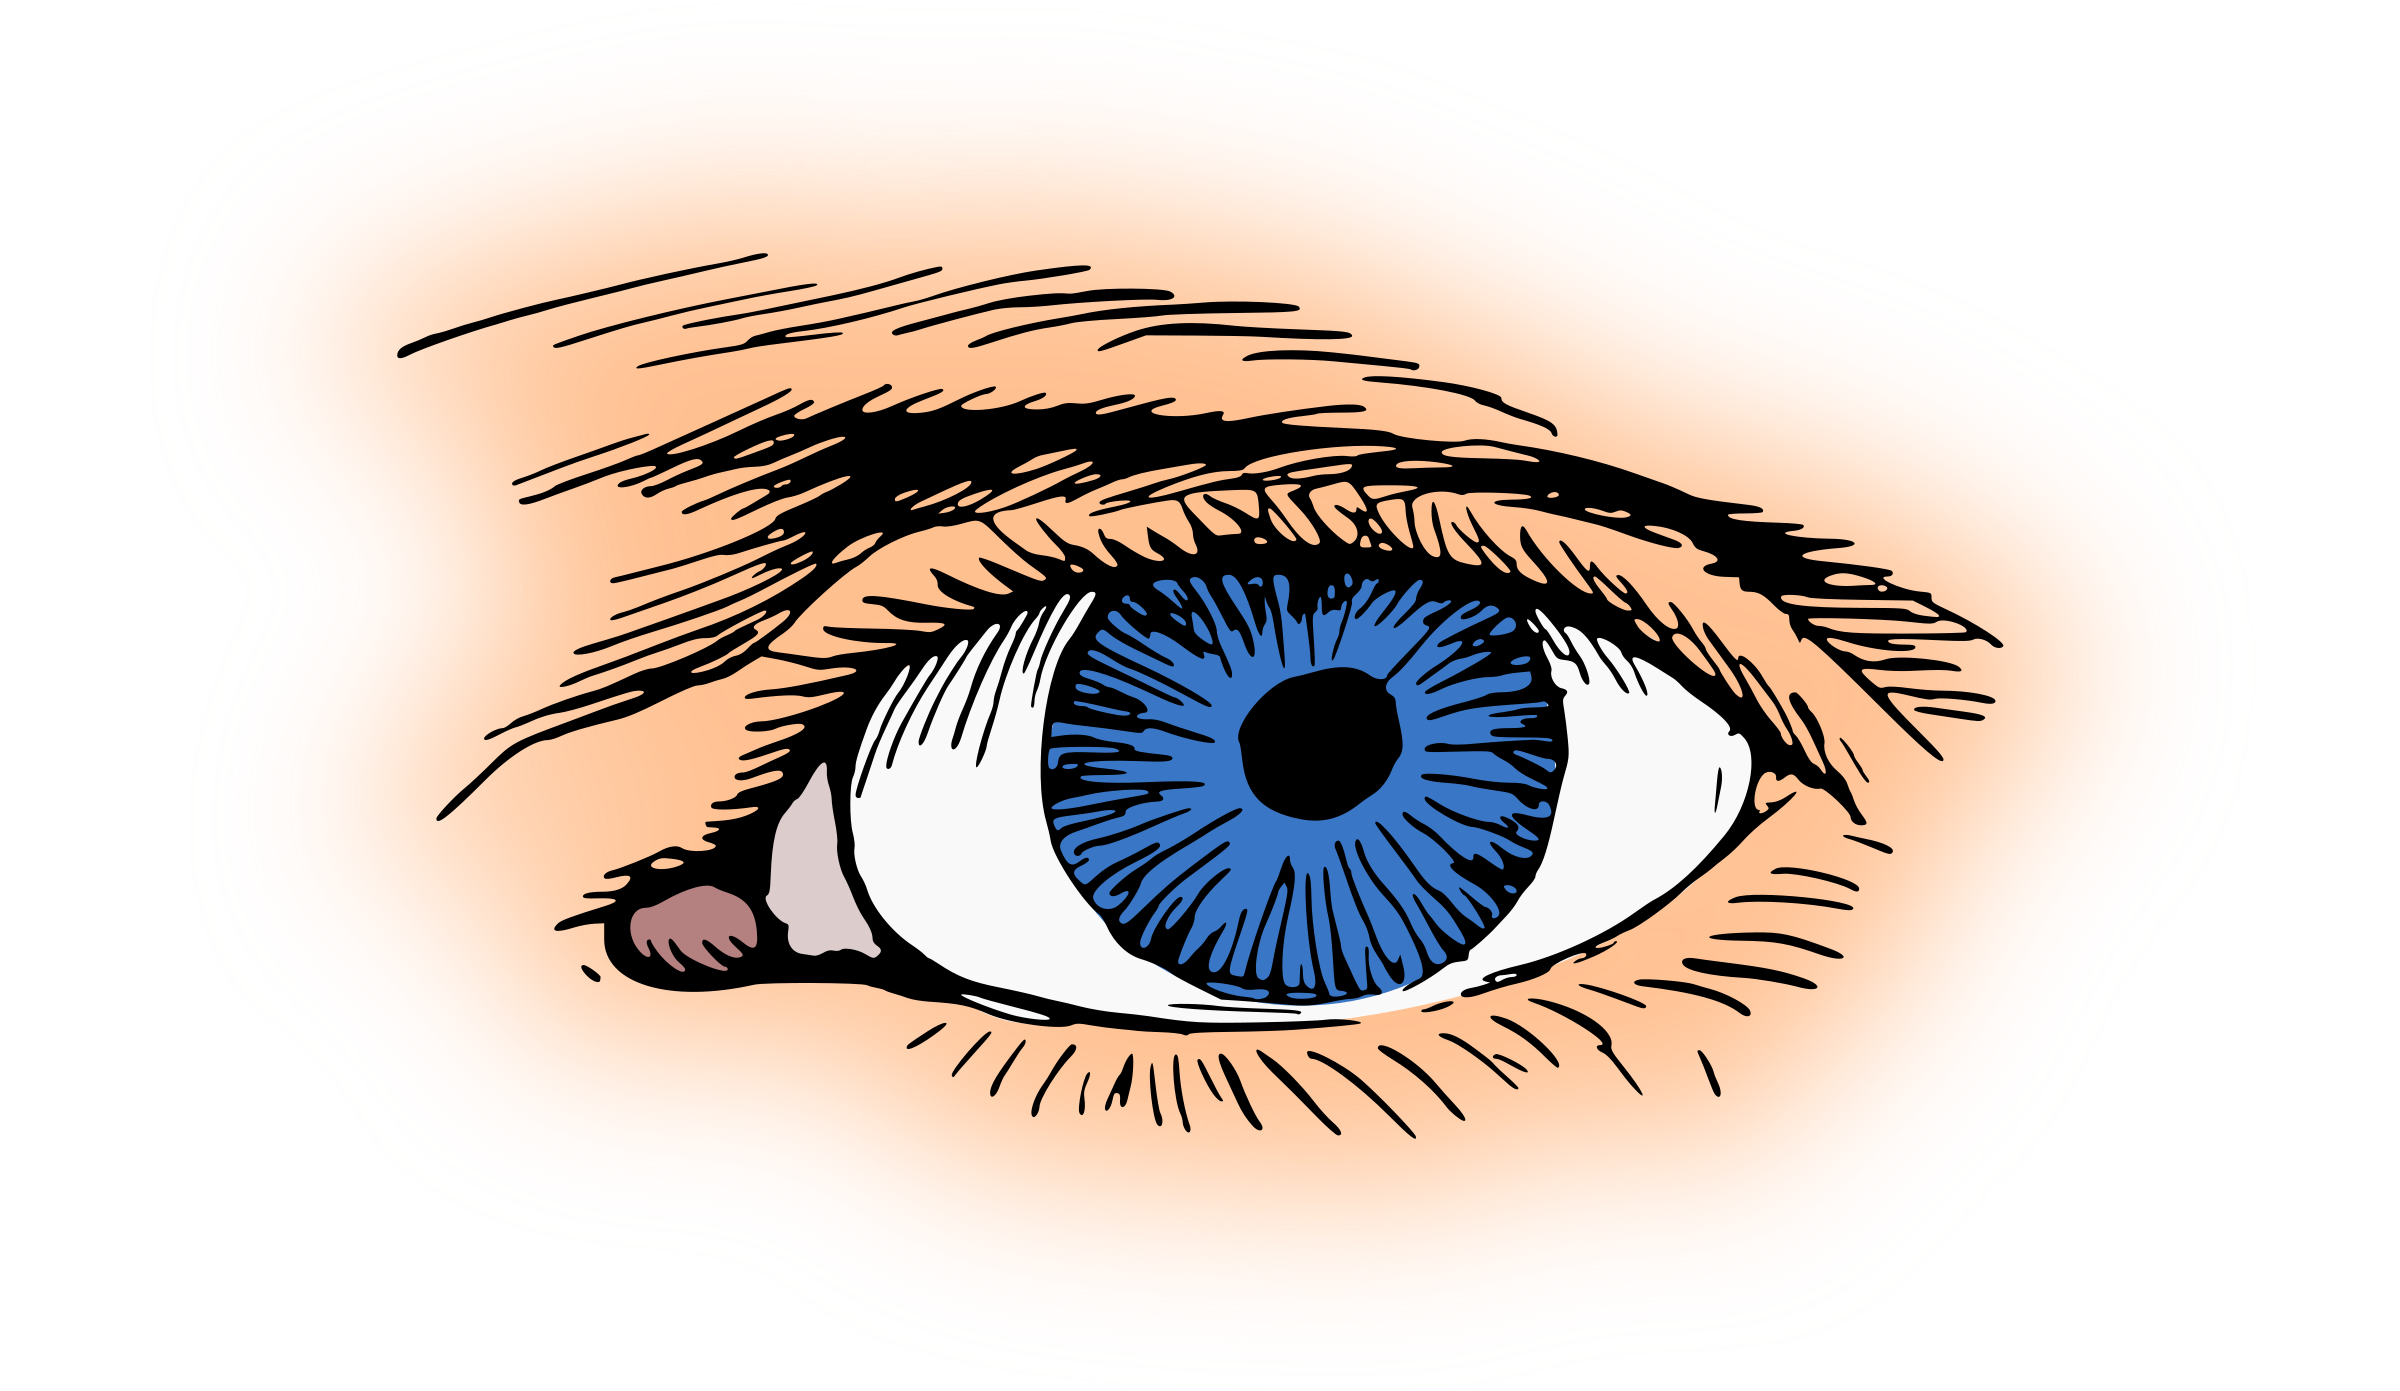 Download Blue Eye Vector Clipart image - Free stock photo - Public ...